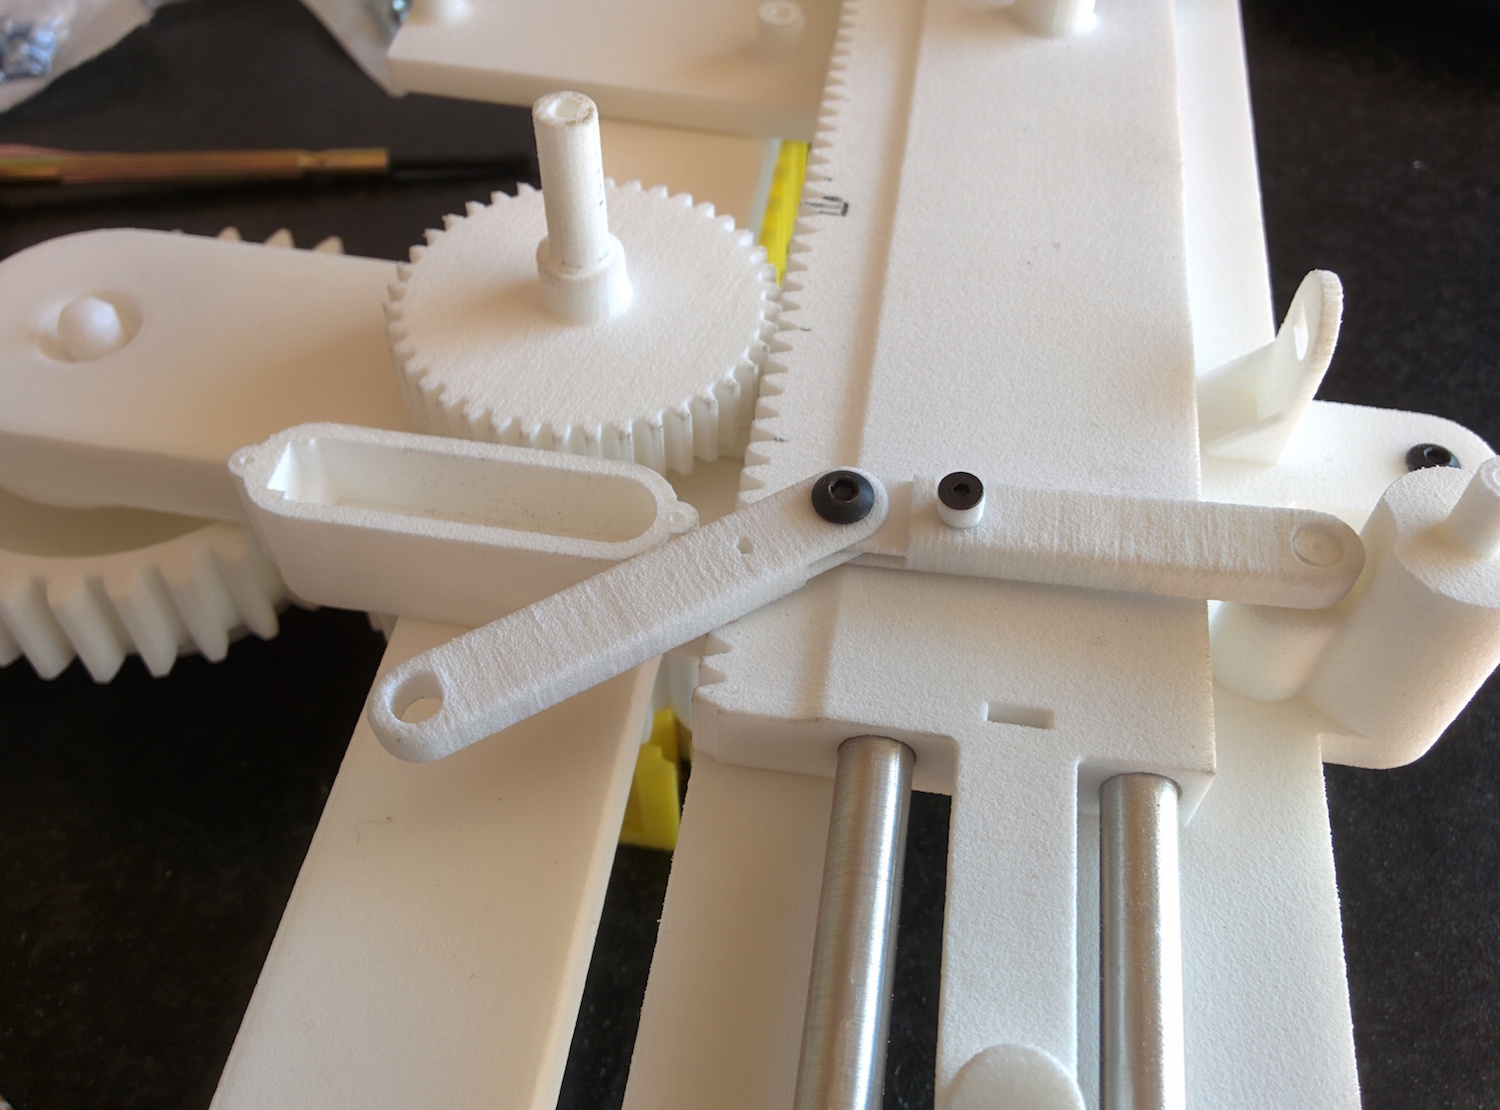 3D Printed Gears: How to Make Them